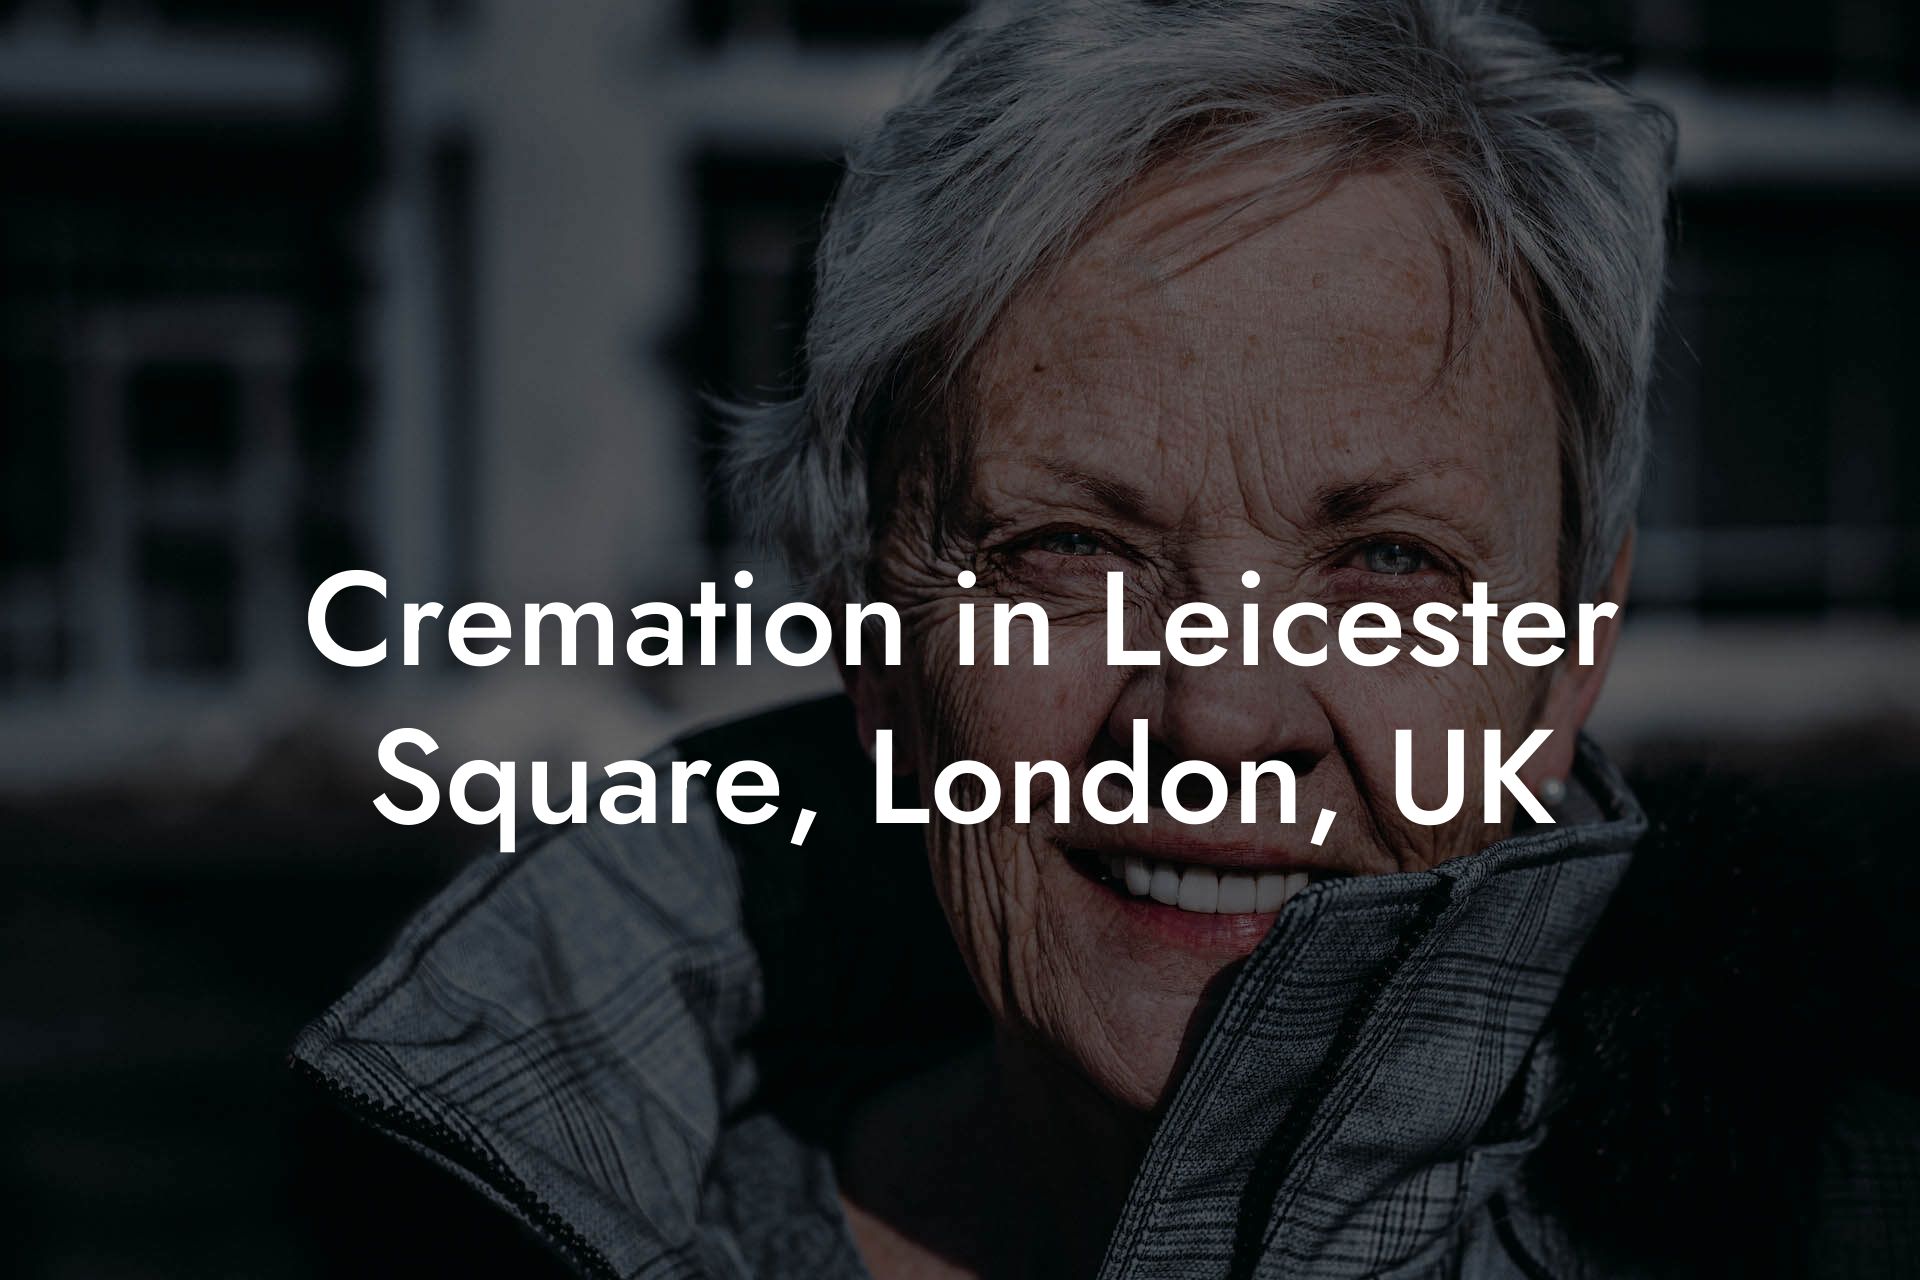 Cremation in Leicester Square, London, UK